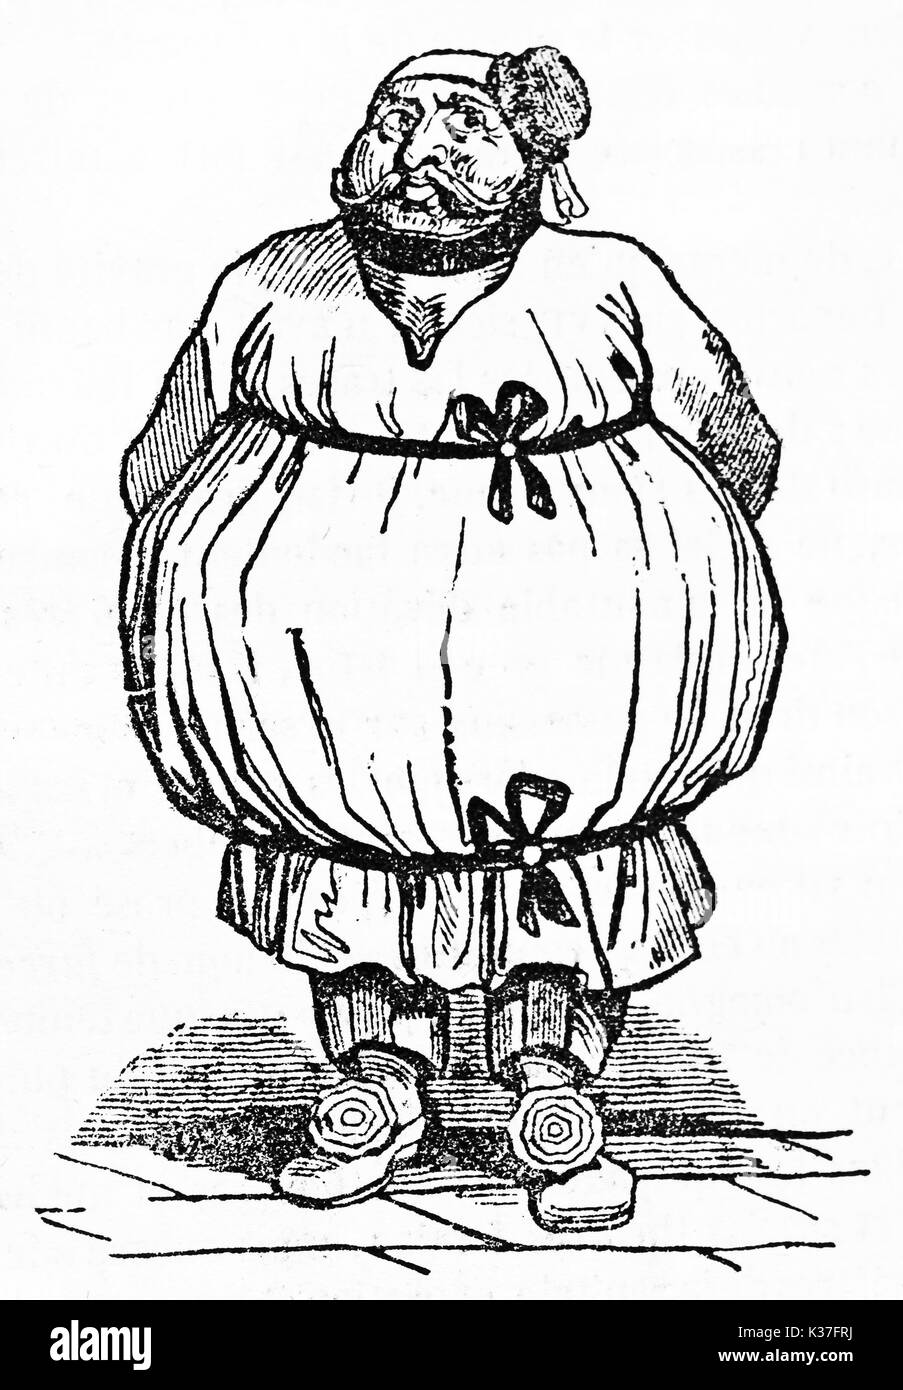 Full body ancient funny portrait of a fat man wearing antique clothes, Gros-Guillaume, French actor. Old Illustration by unidentified author published on Magasin Pittoresque Paris 1834 Stock Photo